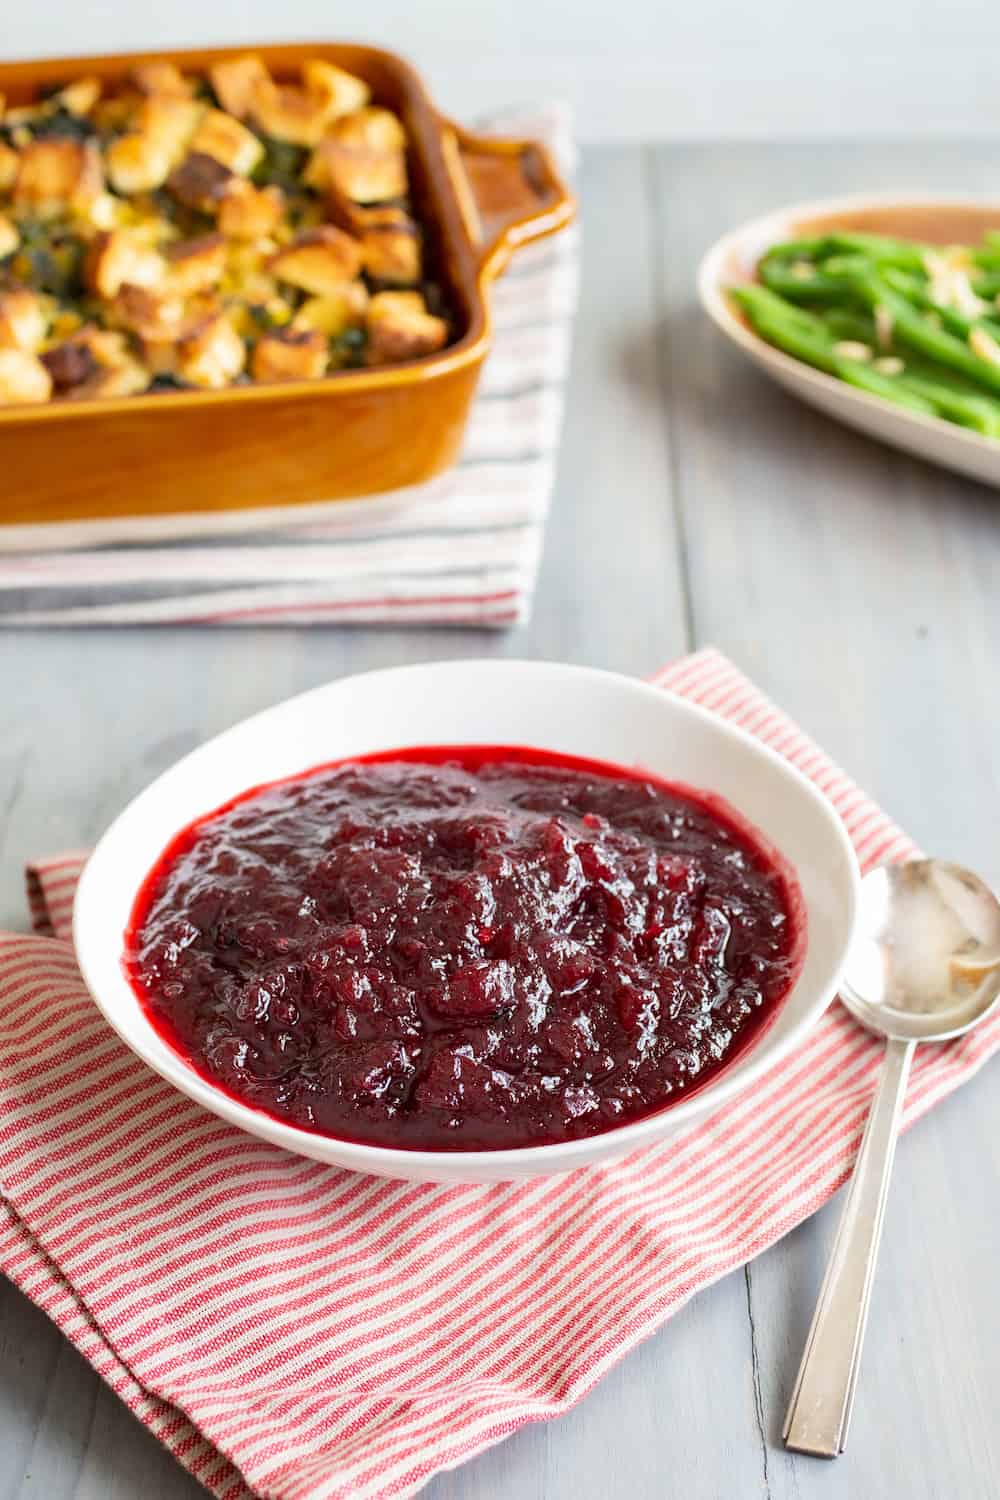 cranberry spread and sauce